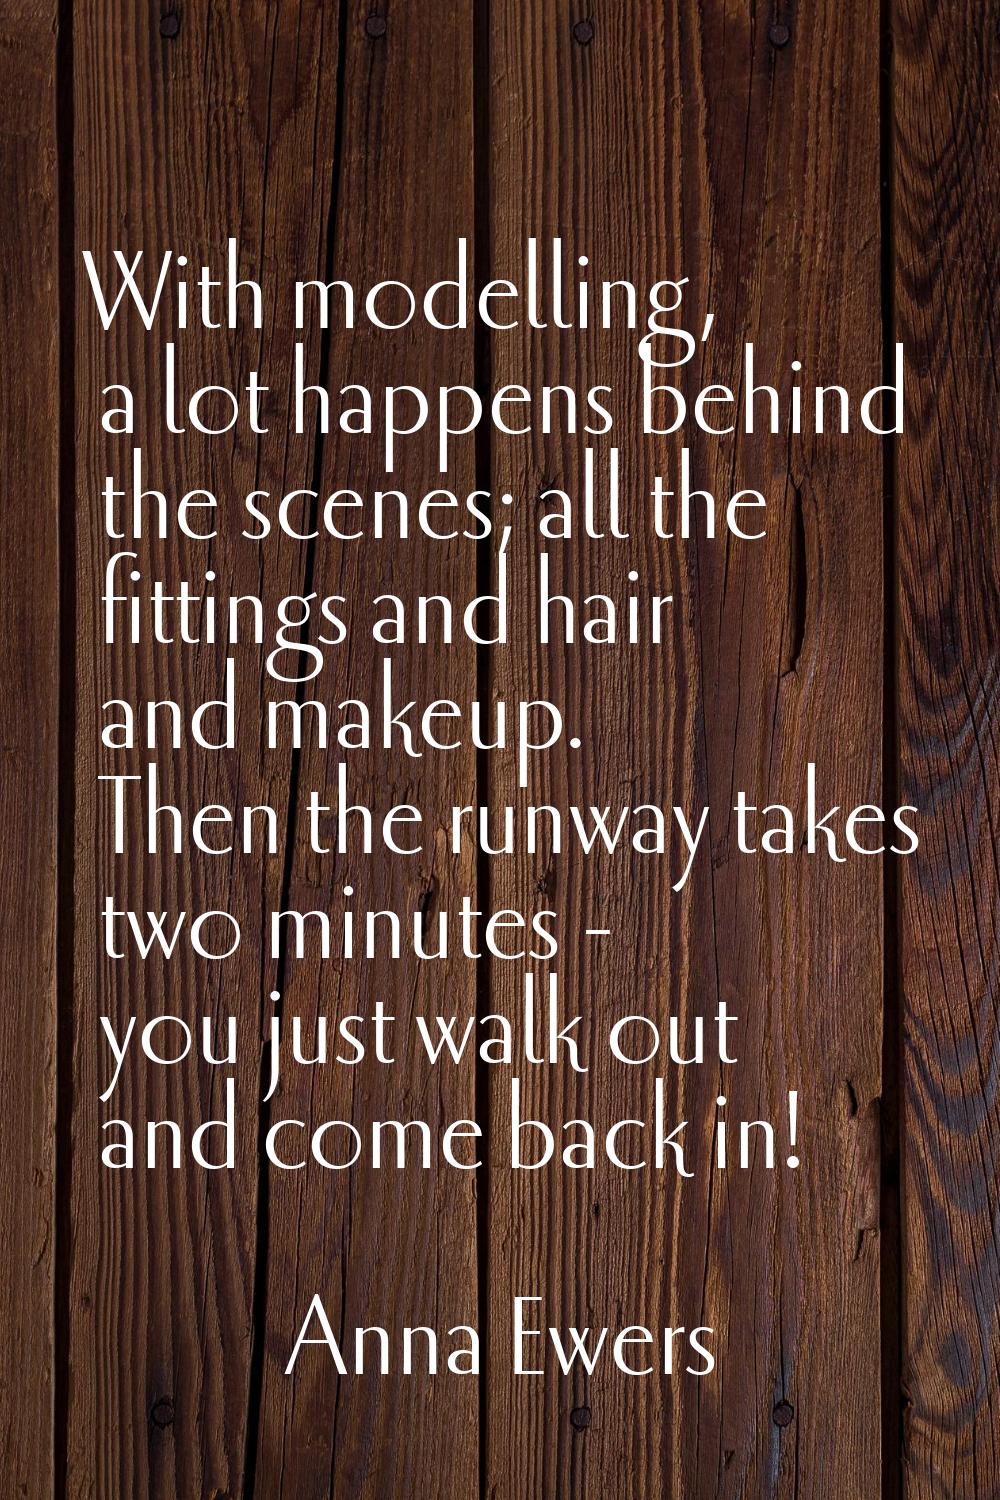 With modelling, a lot happens behind the scenes; all the fittings and hair and makeup. Then the run